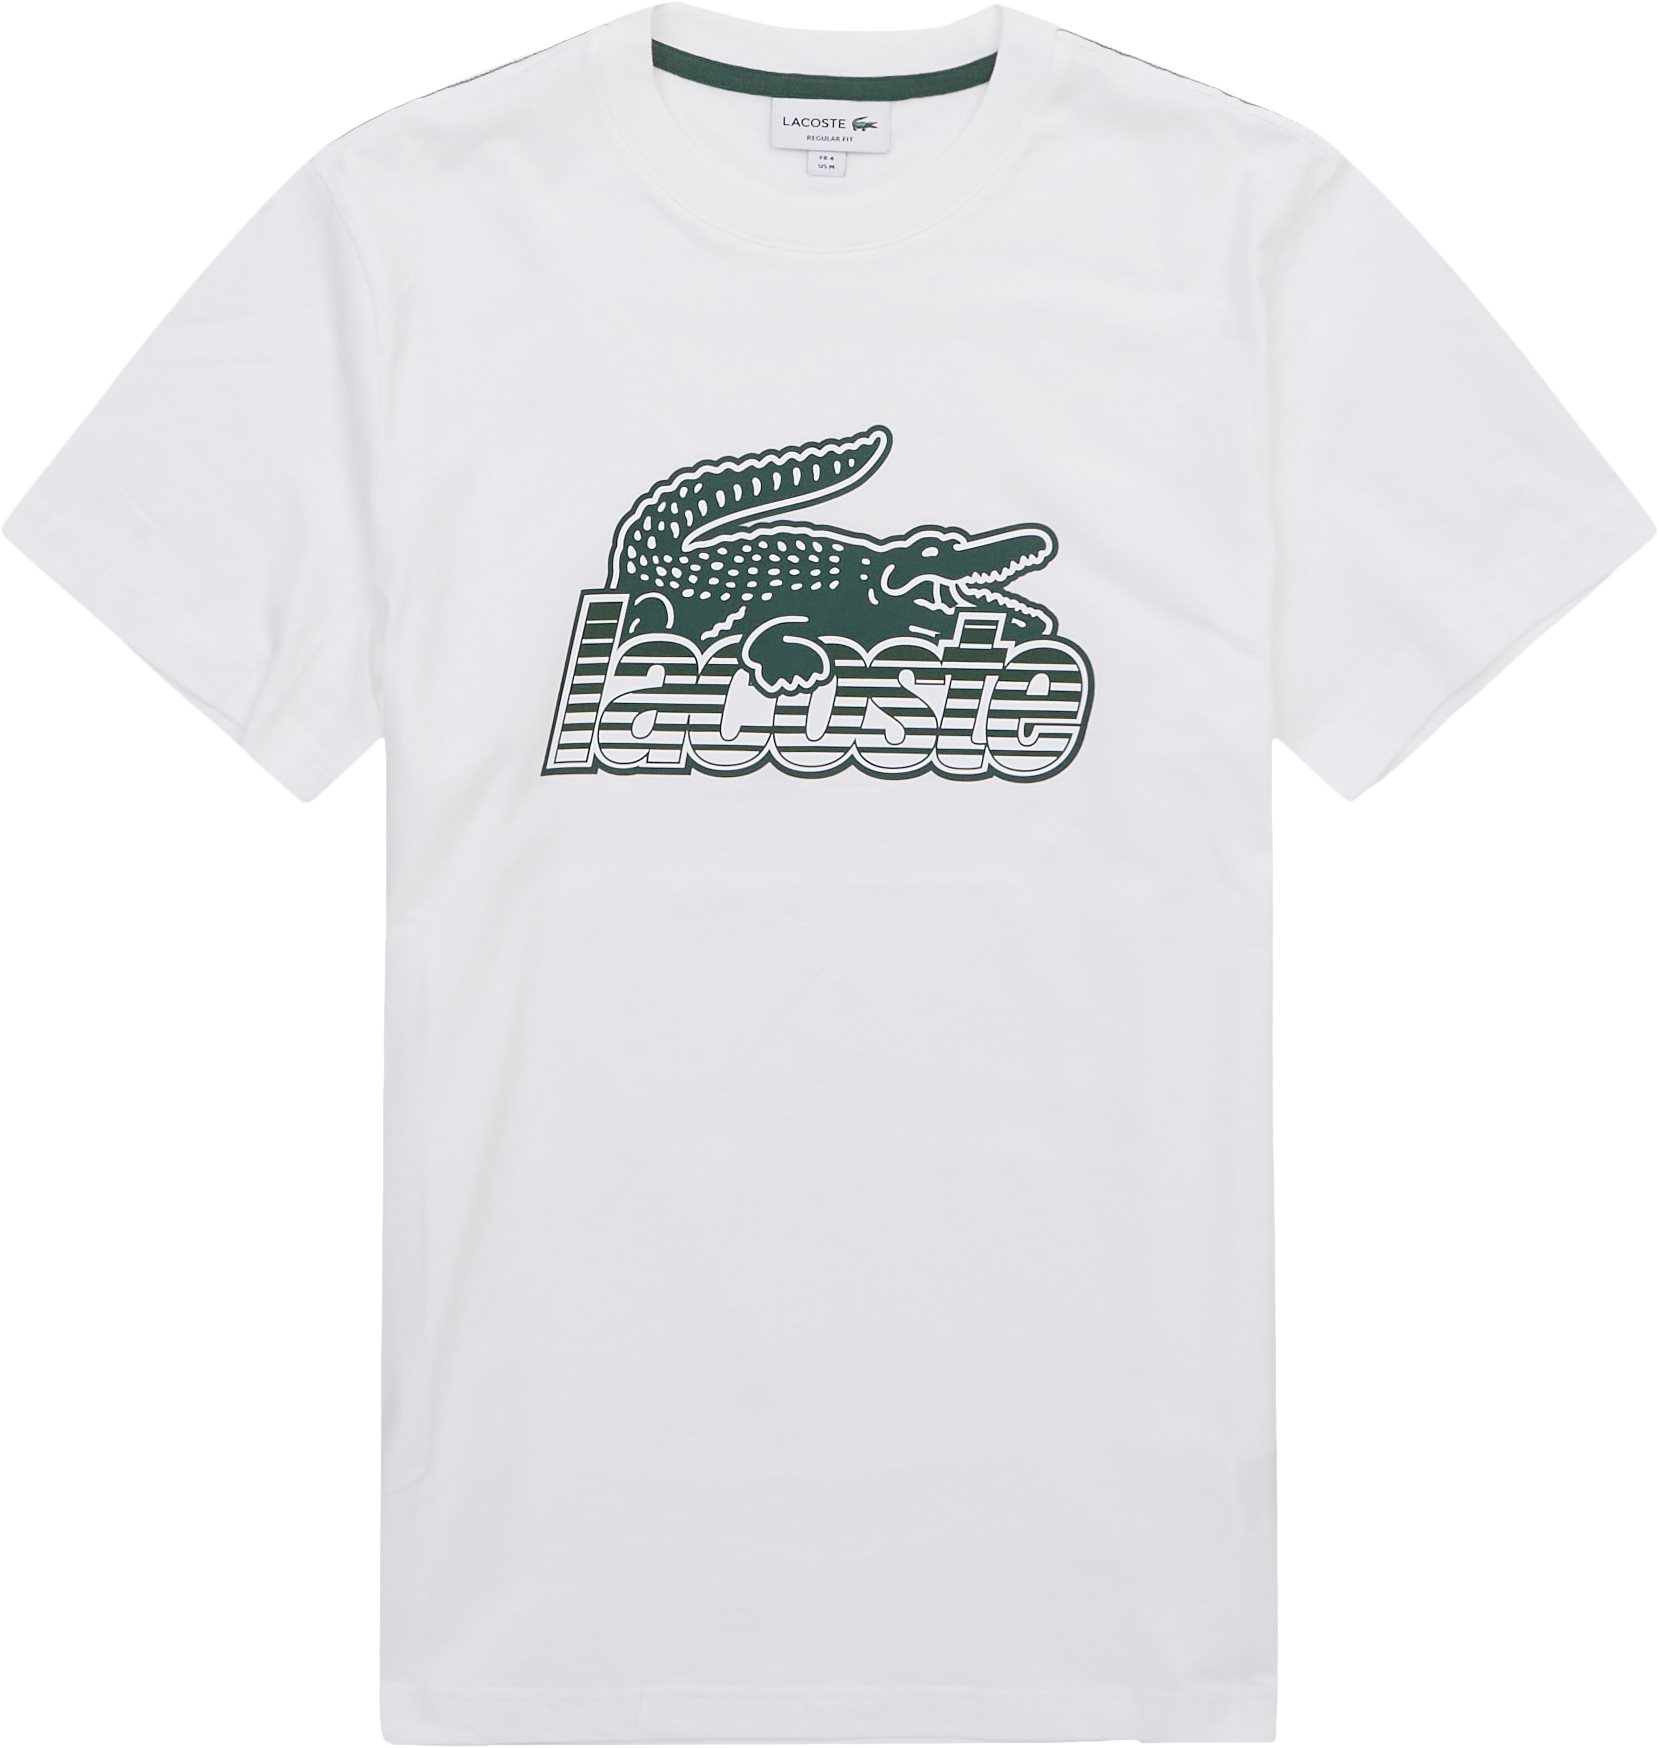 Lacoste T-shirts TH5070 White